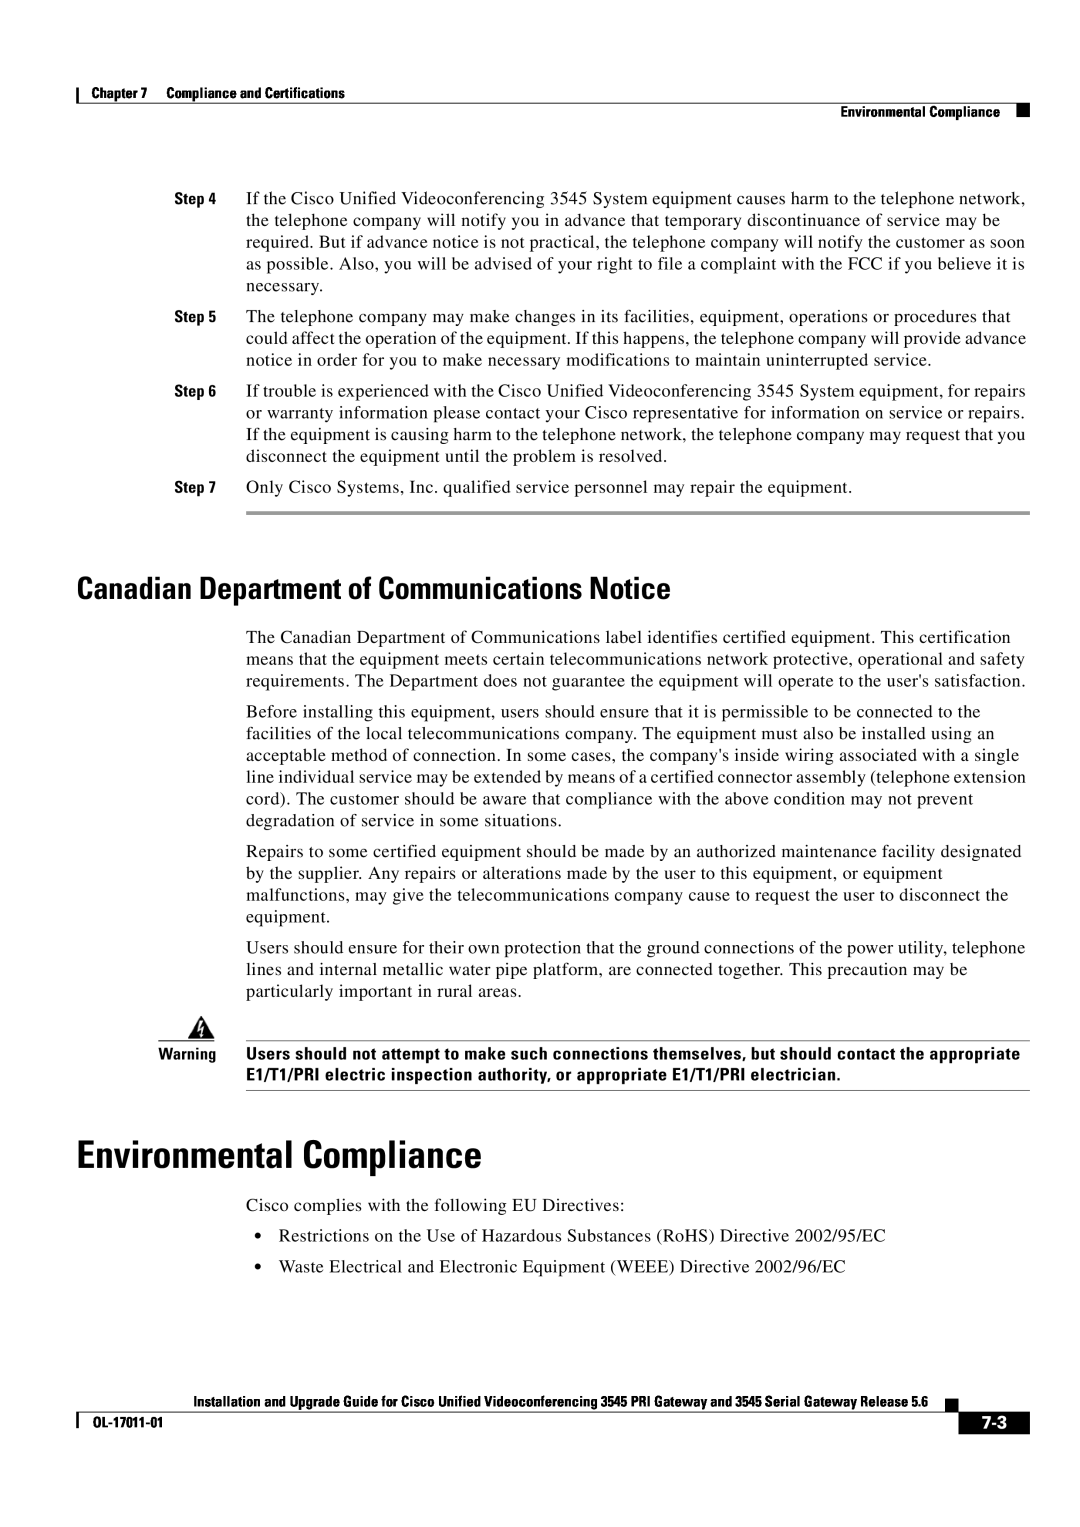 Cisco Systems 3545 Serial, 3545 PRI manual Environmental Compliance, Canadian Department of Communications Notice 